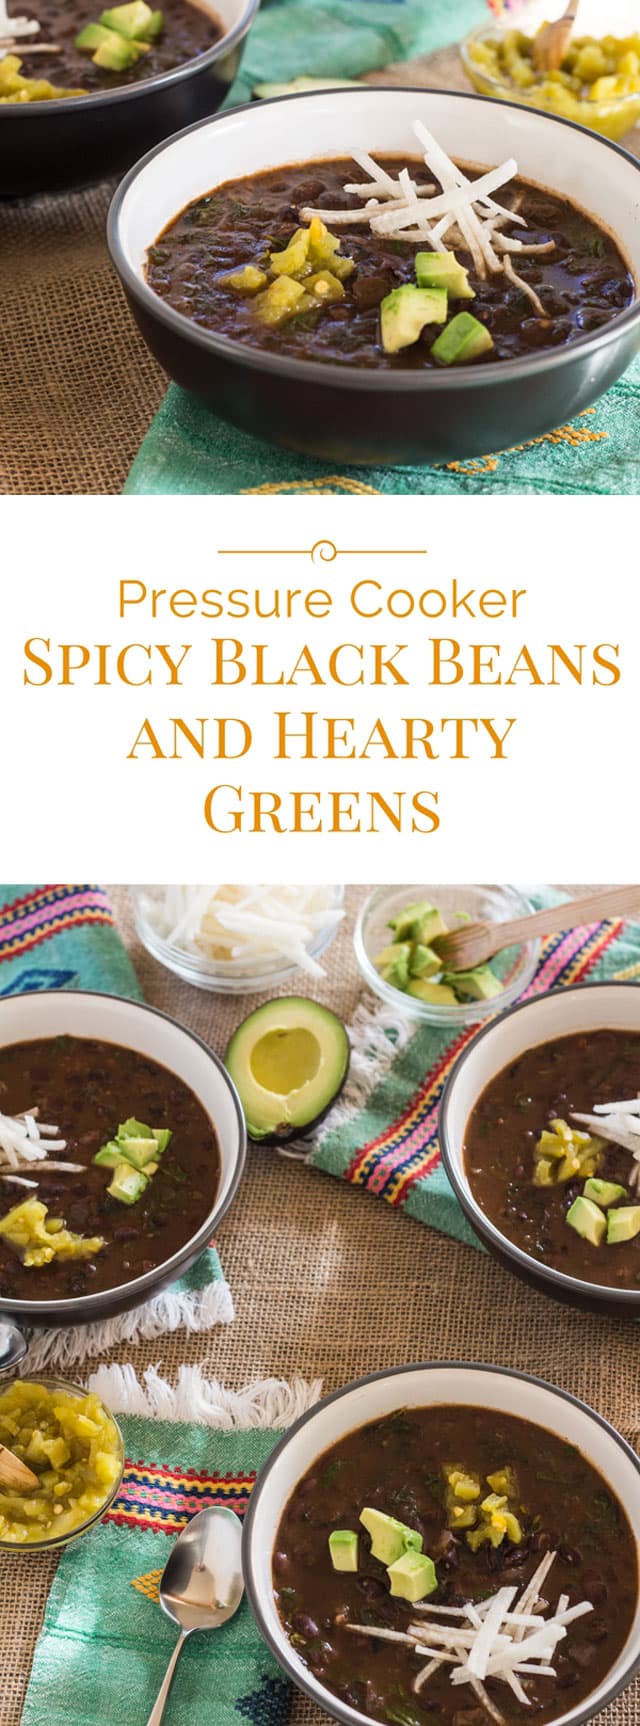 photo collage of bowls of spicy black beans with hearty greens